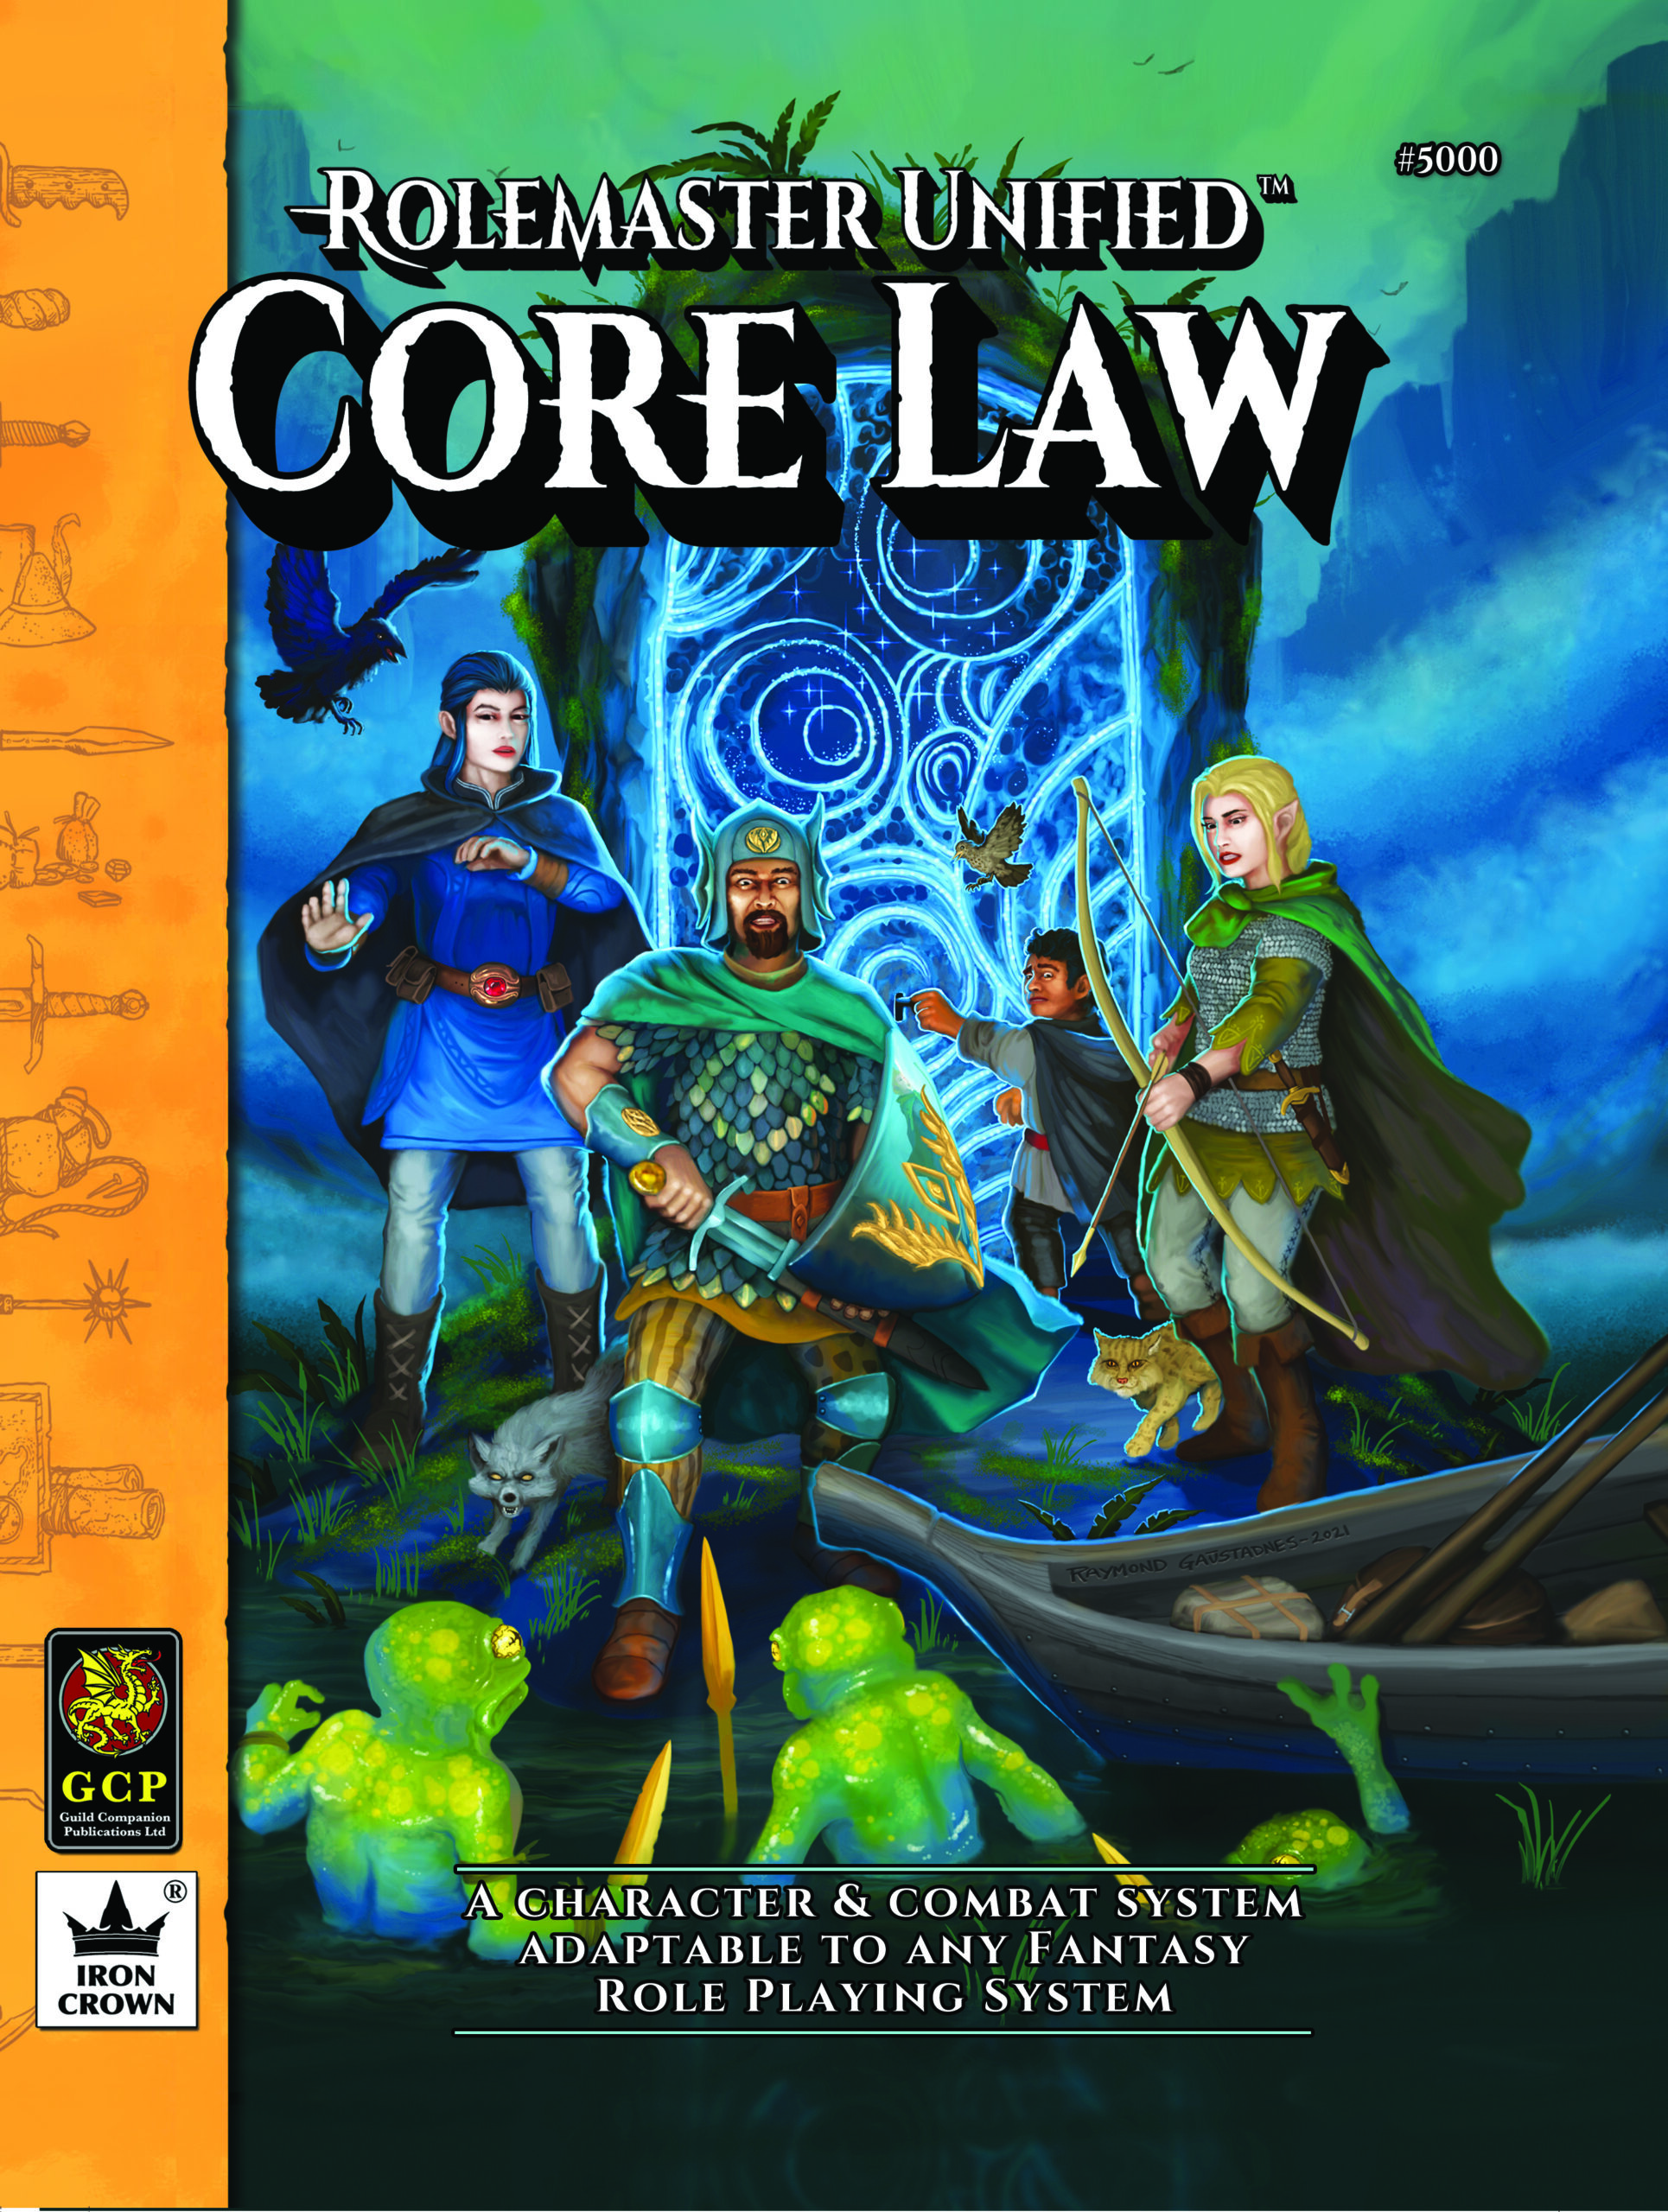 Rolemaster Unified Core Law out now! – Iron Crown Enterprises